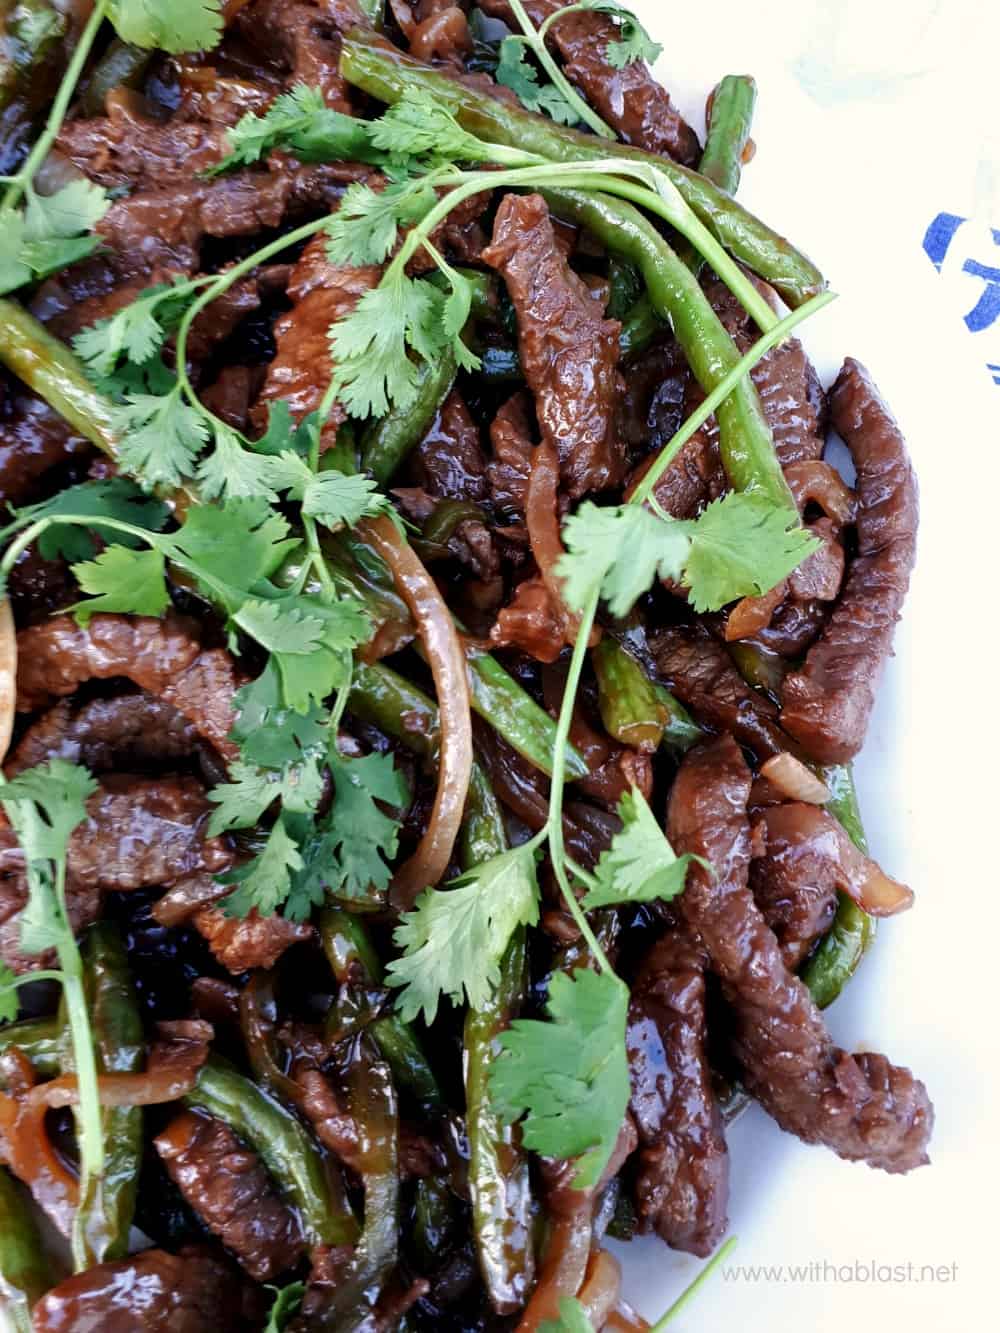 Delicious and so simple to make Teriyaki Beef and Greens Stir-Fry is ready in under 20 minutes - the perfect busy week night dinner